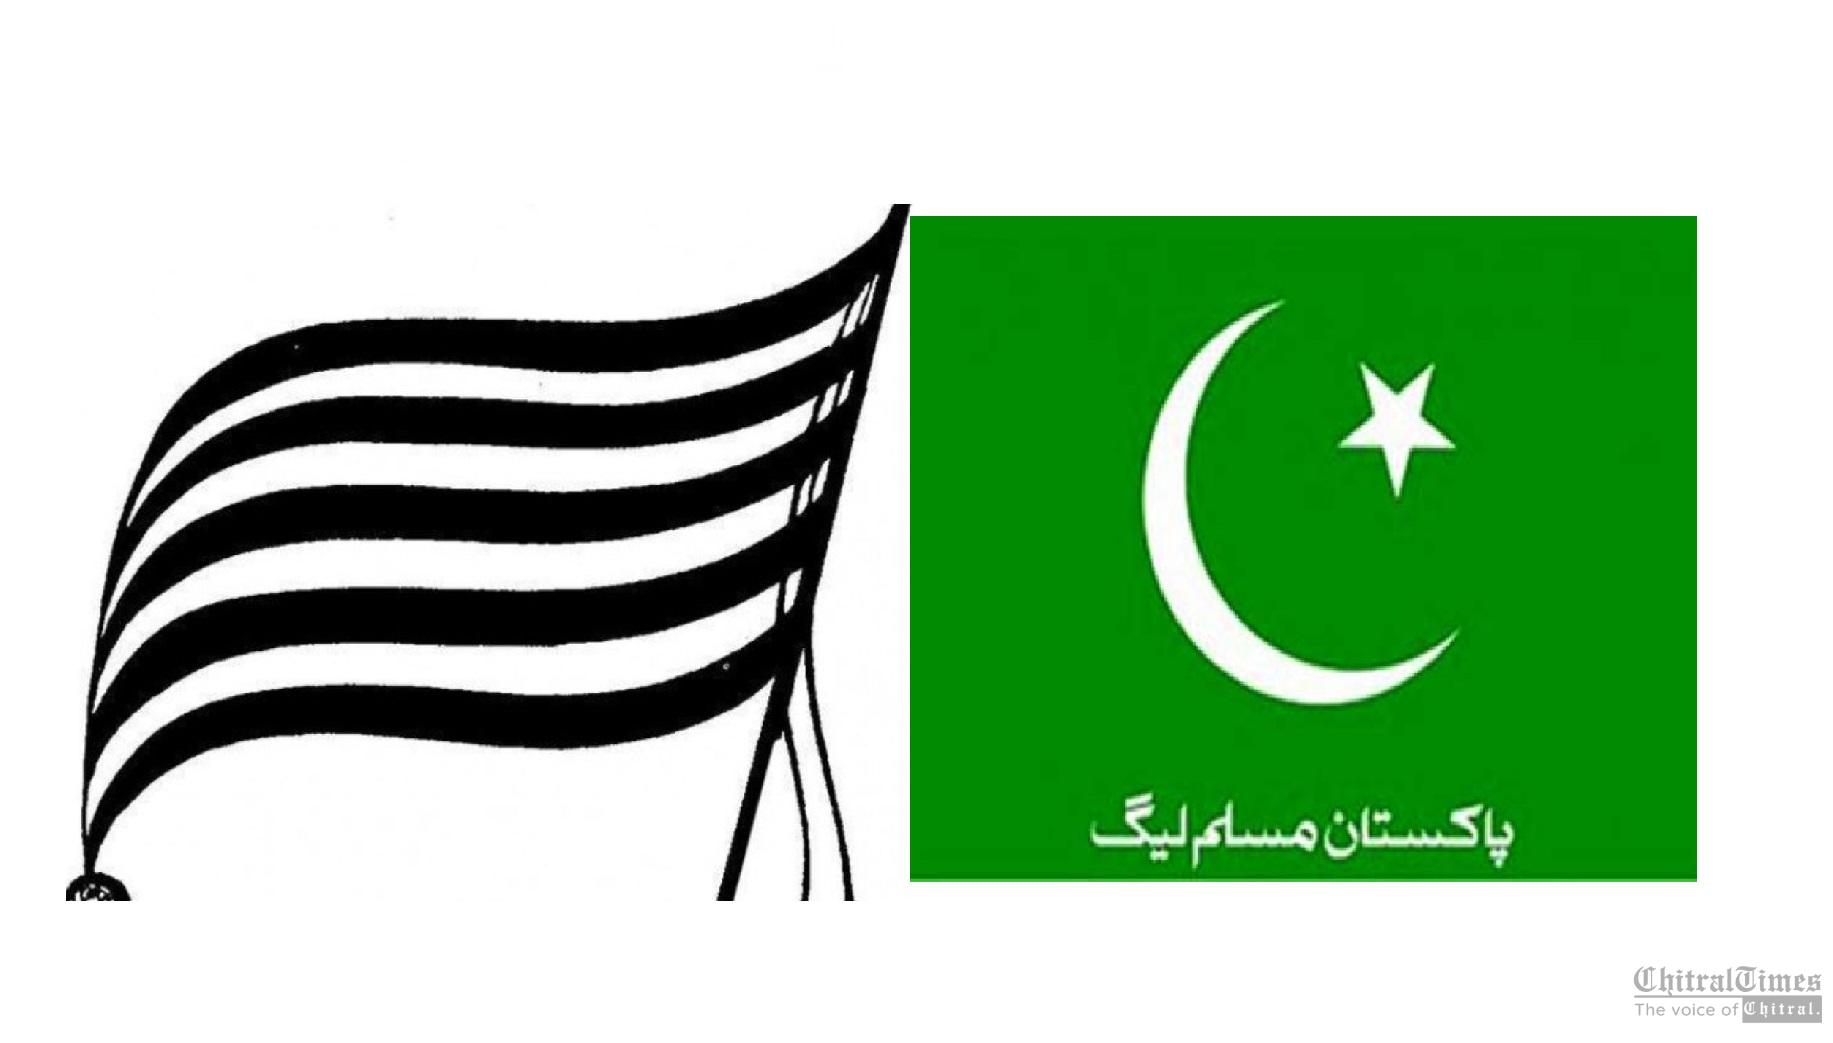 juif and pmln flag